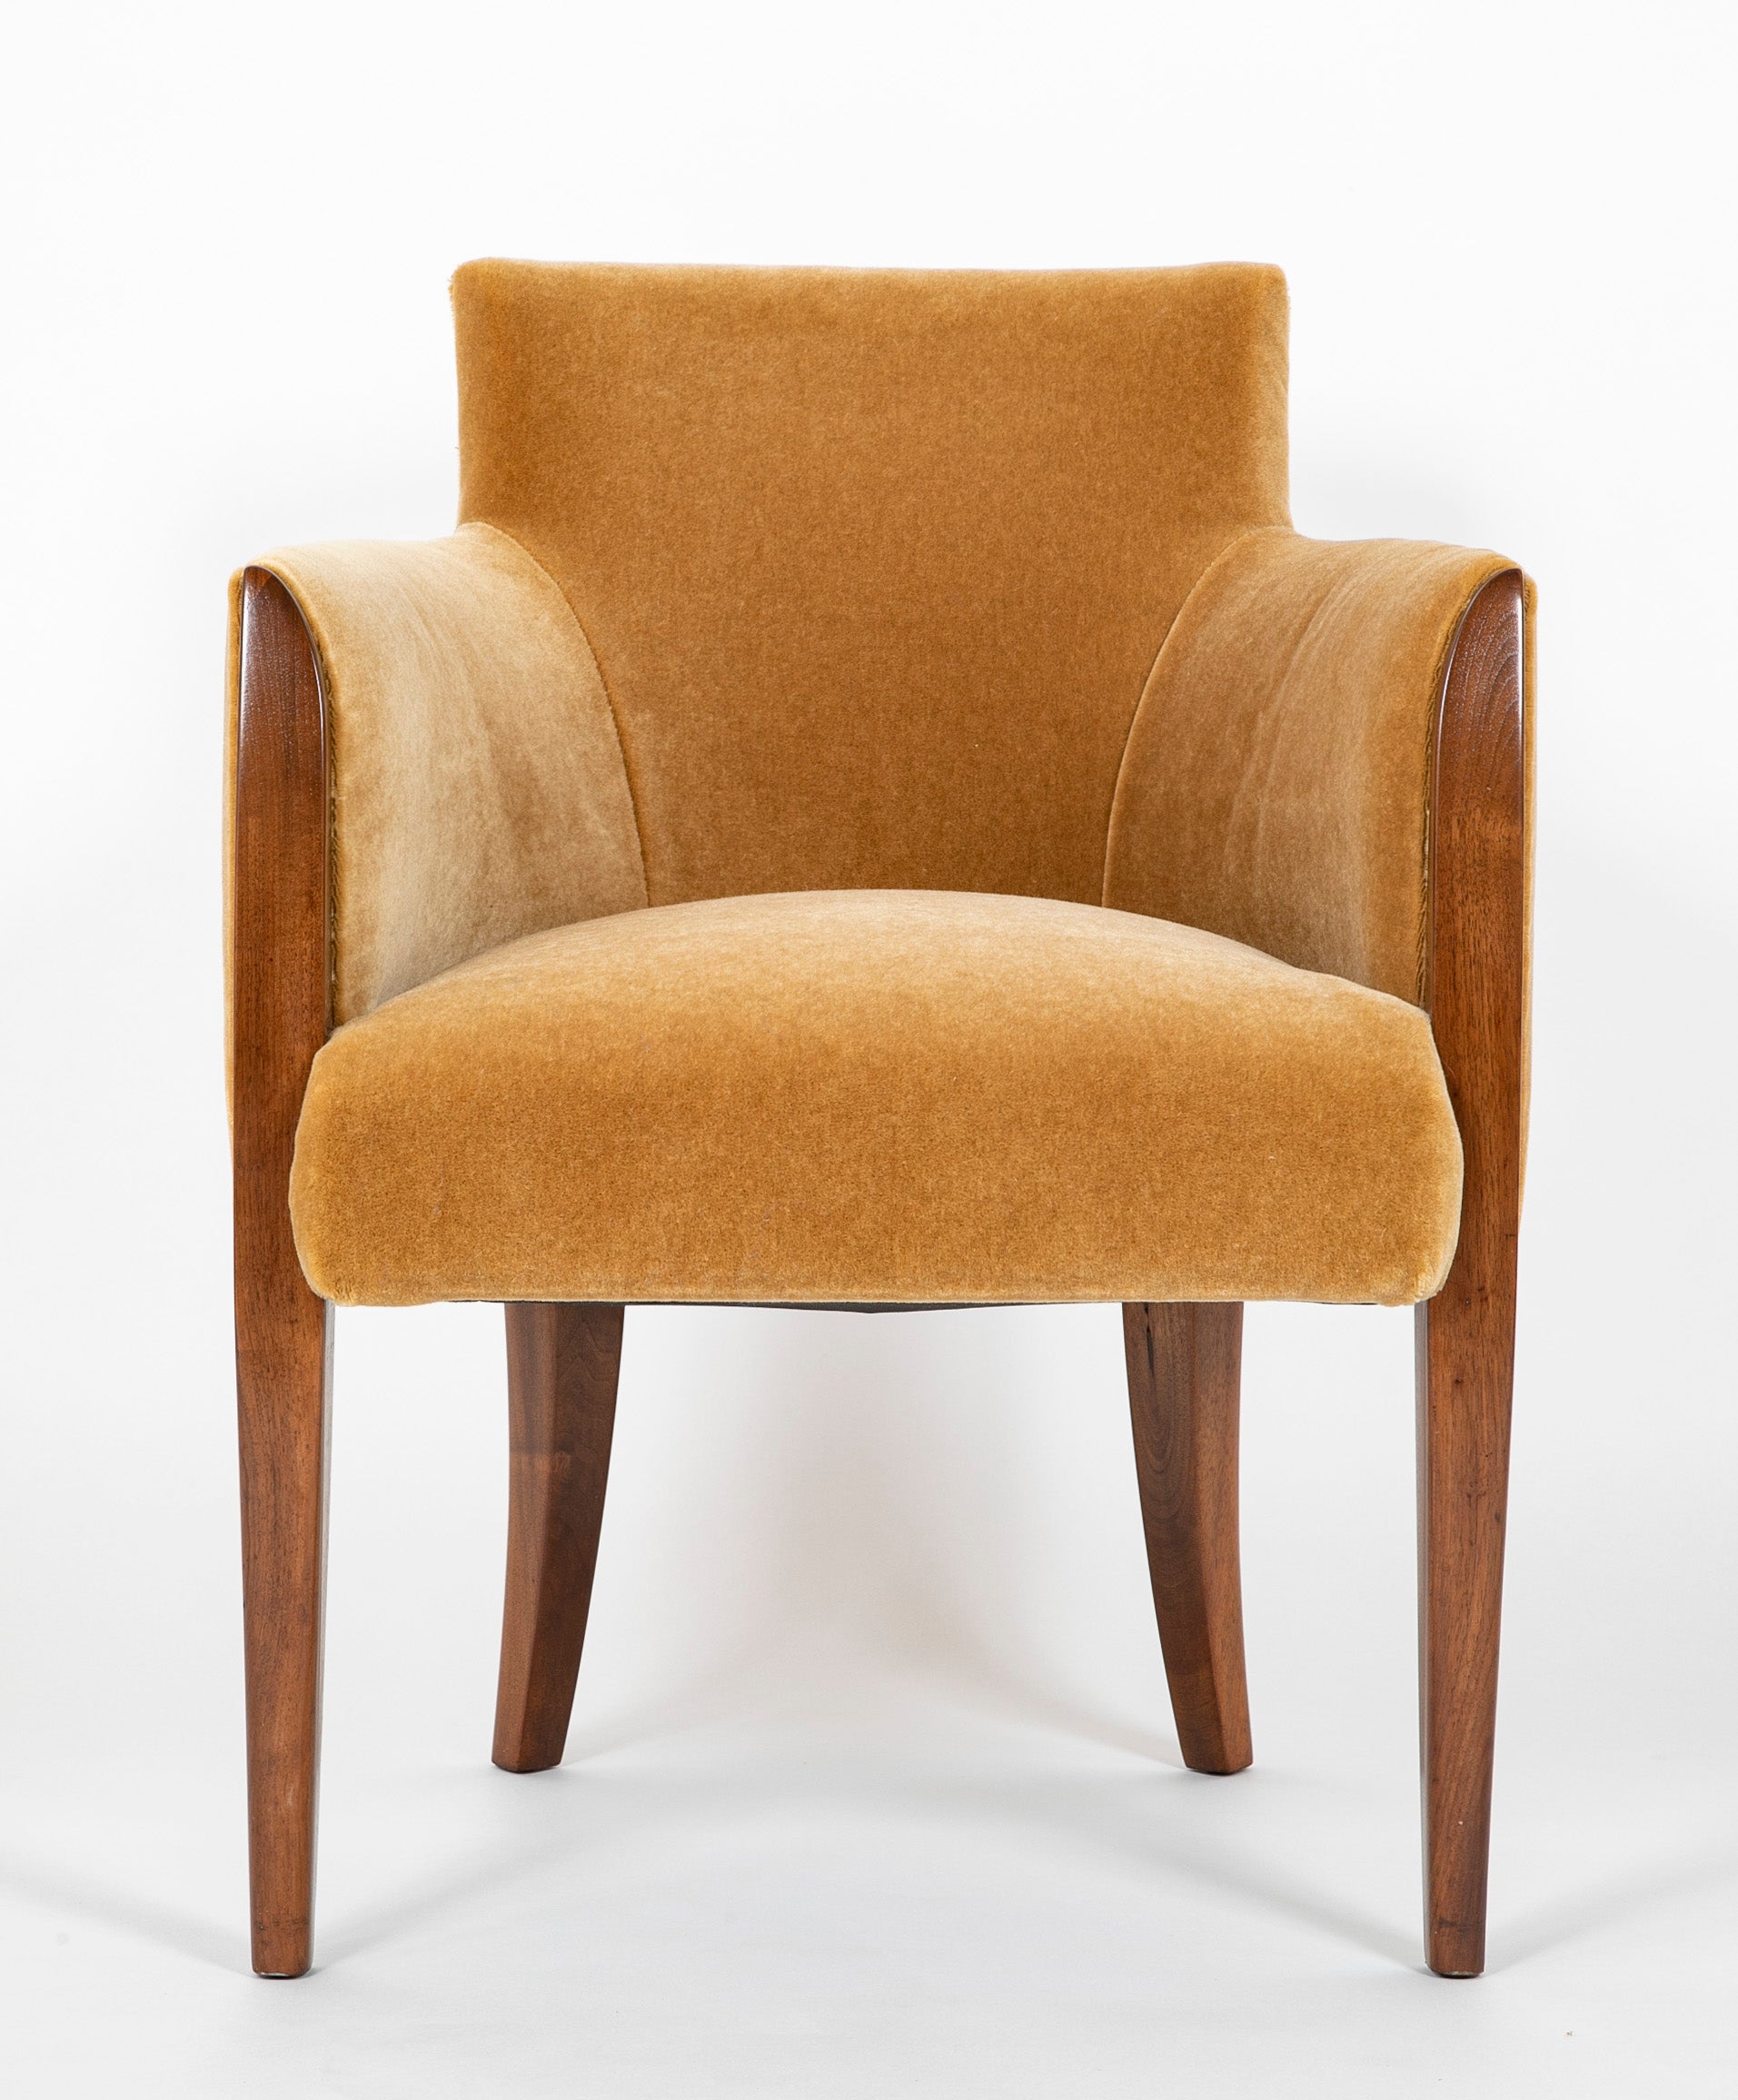 A Set of Four Walnut and Mohair Chairs Designed By Dominique